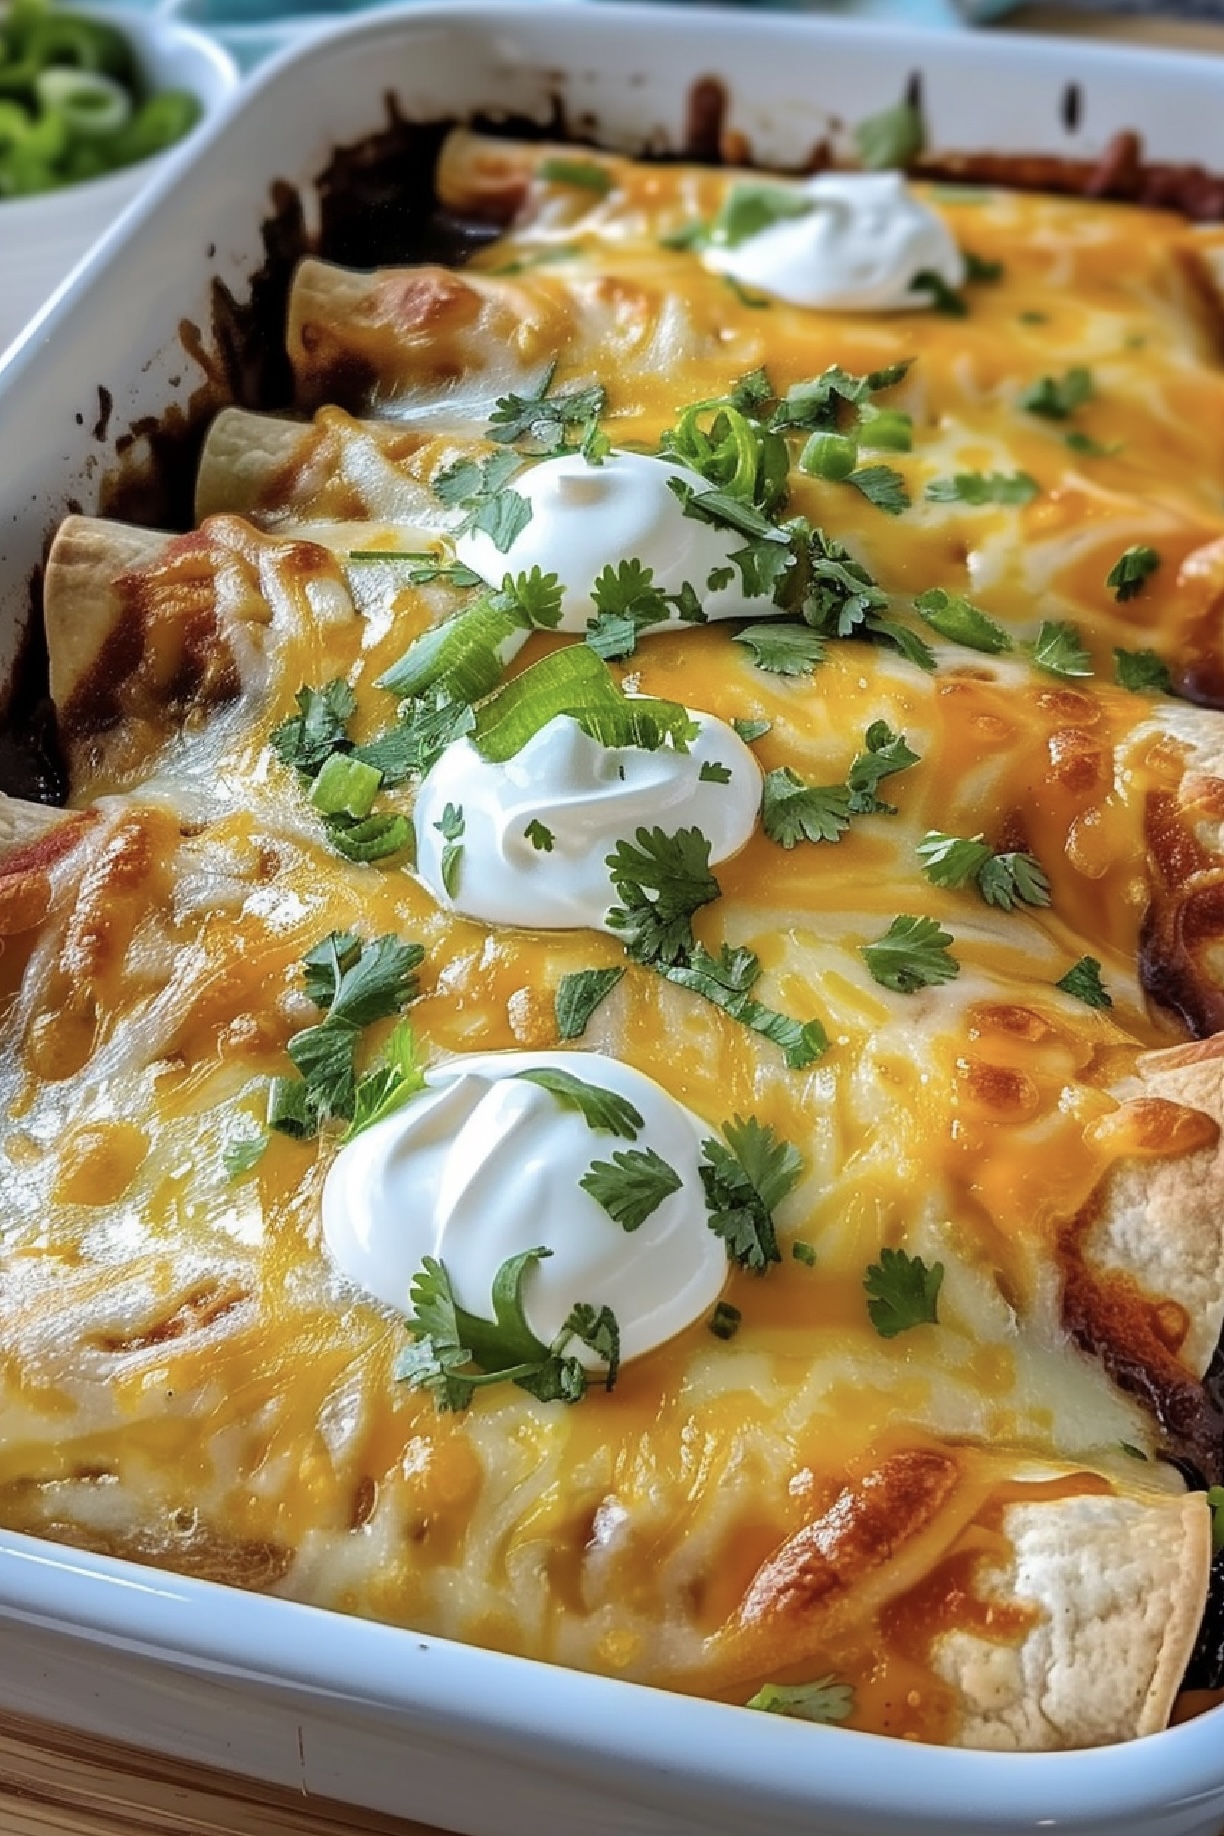 Whip up these easy Cream Cheese Enchiladas for a family dinner that's sure to impress.